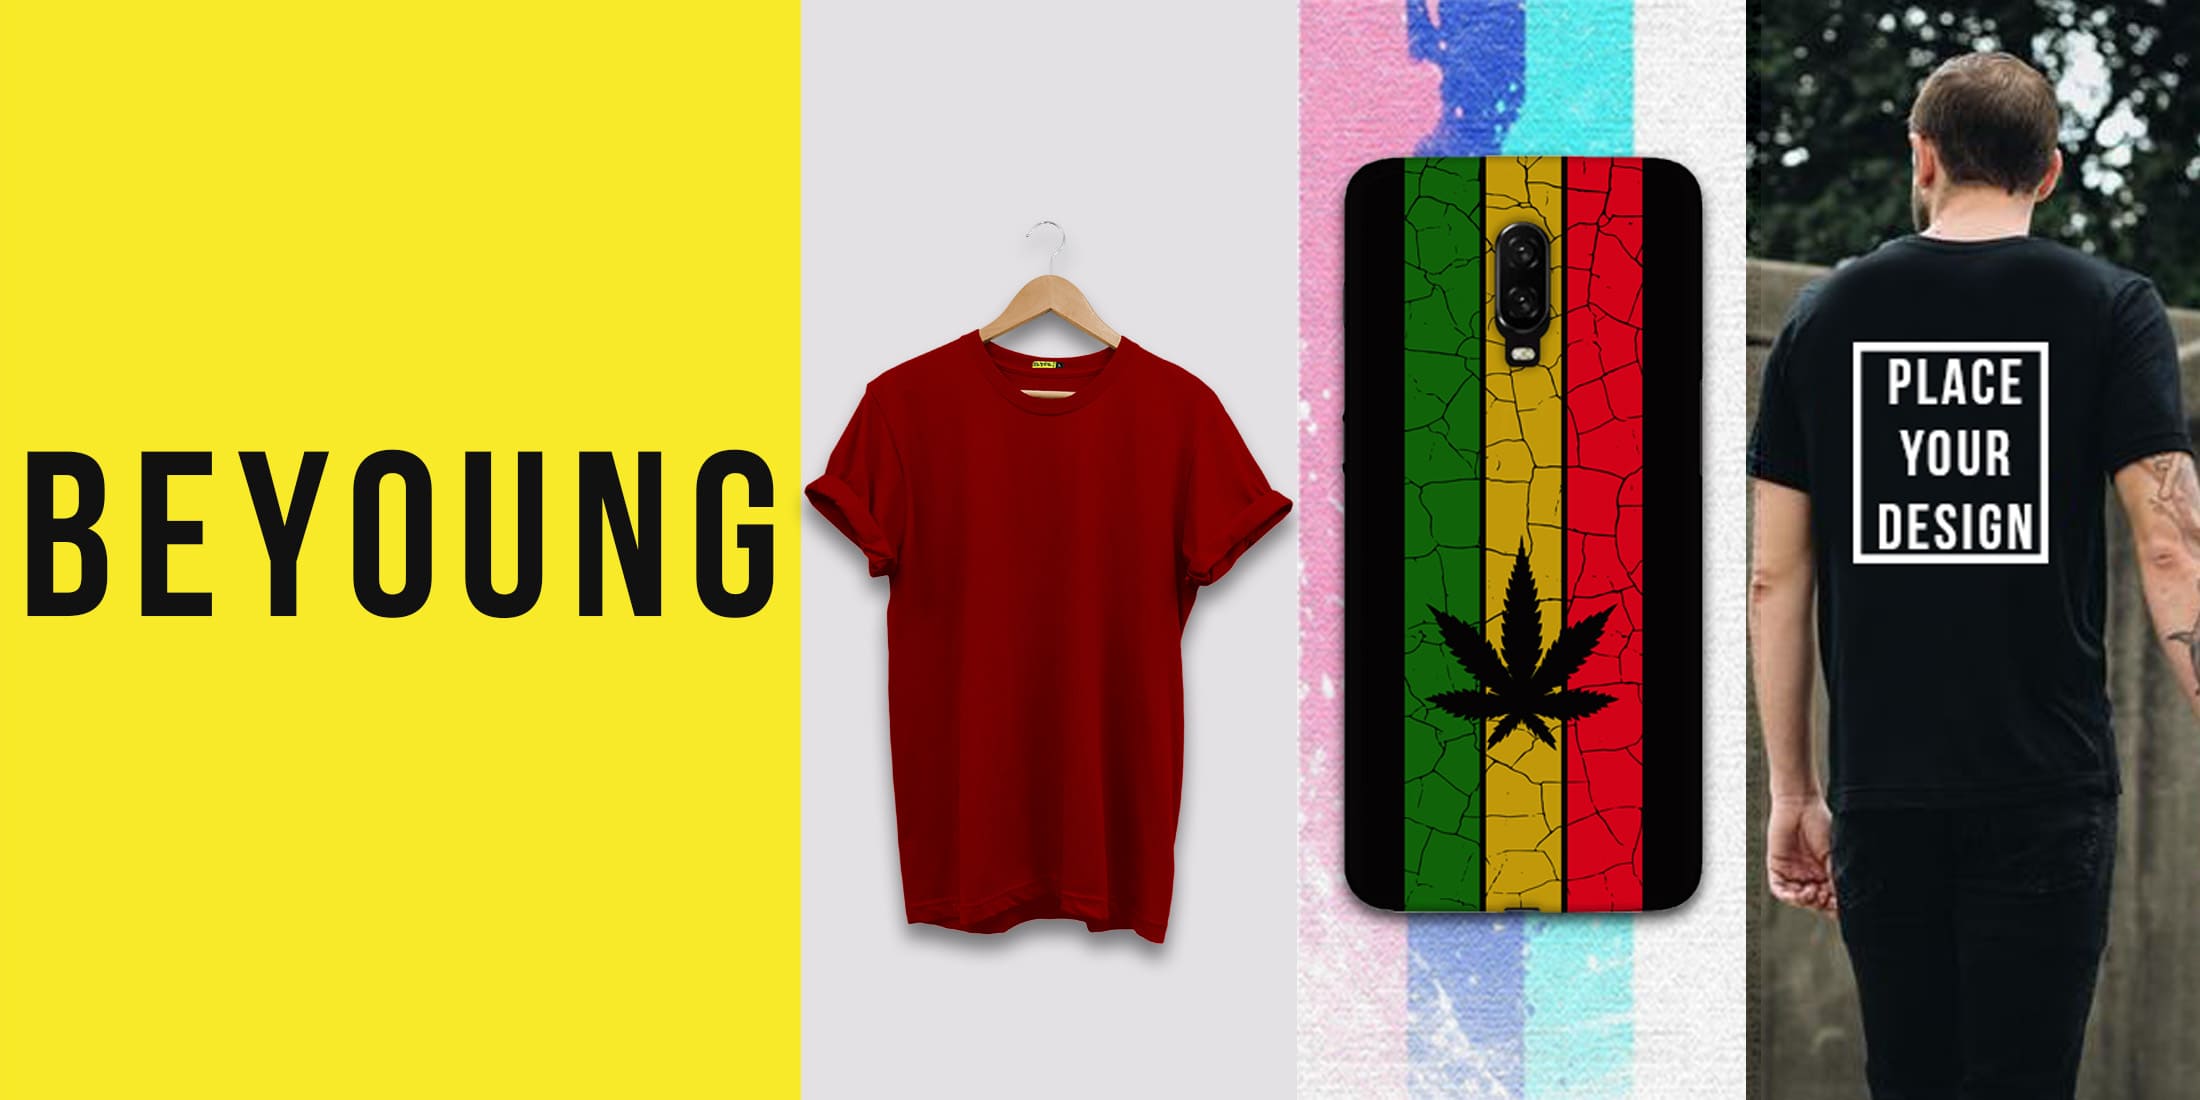 Beyoung Designs for Graphic T Shirts